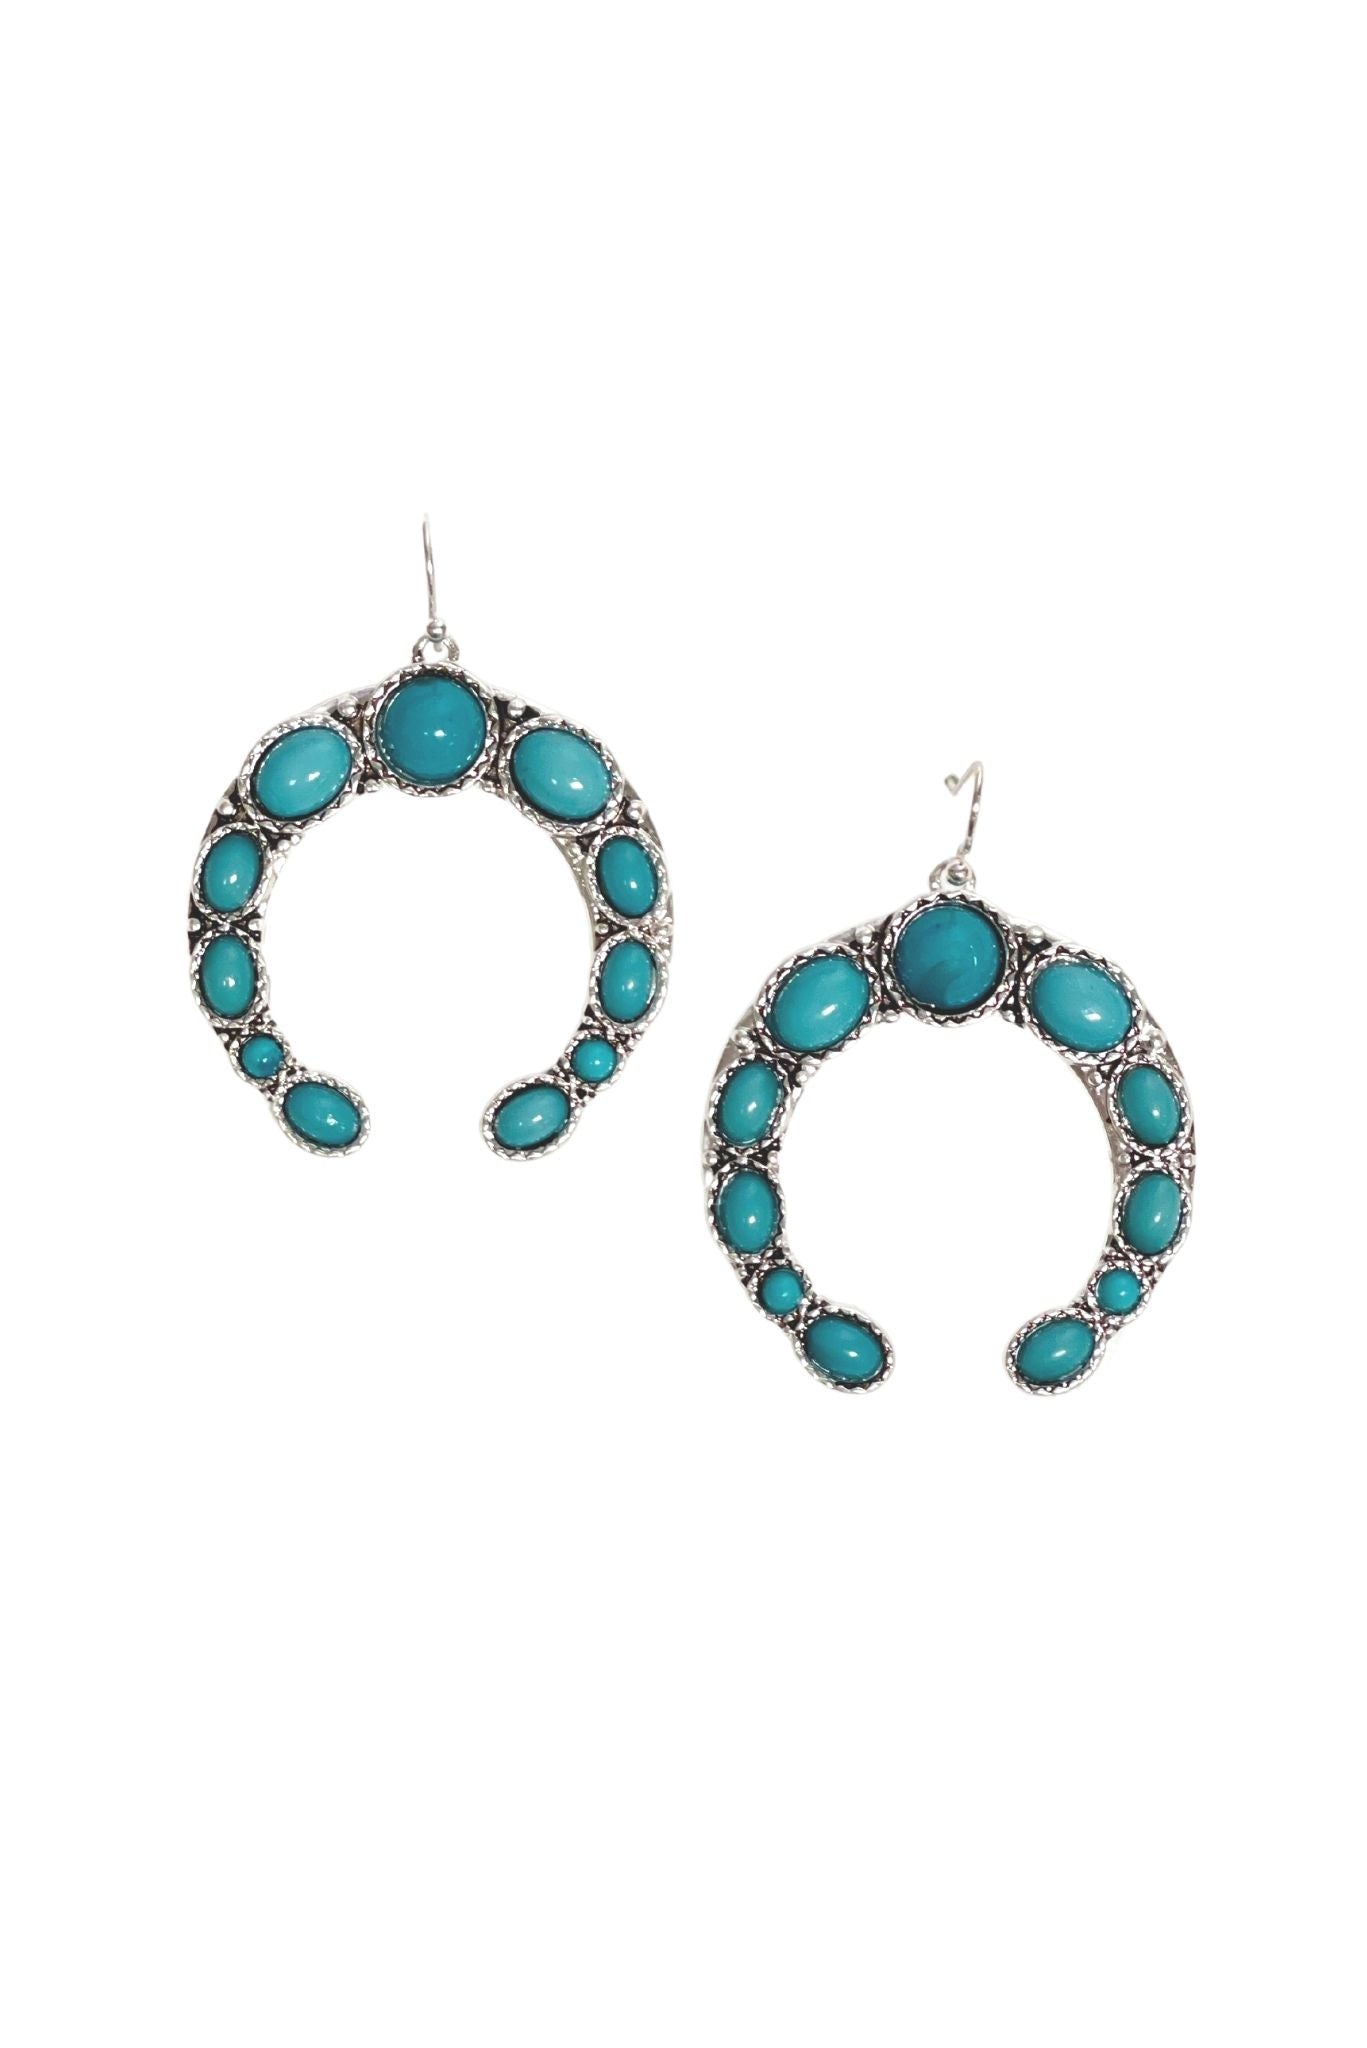 Load image into Gallery viewer, turquoise dangle earrings, metal, silver, turquoise, earrings, statement earrings, spring style, mom style, shop style your senses by mallory fitzsimmons
